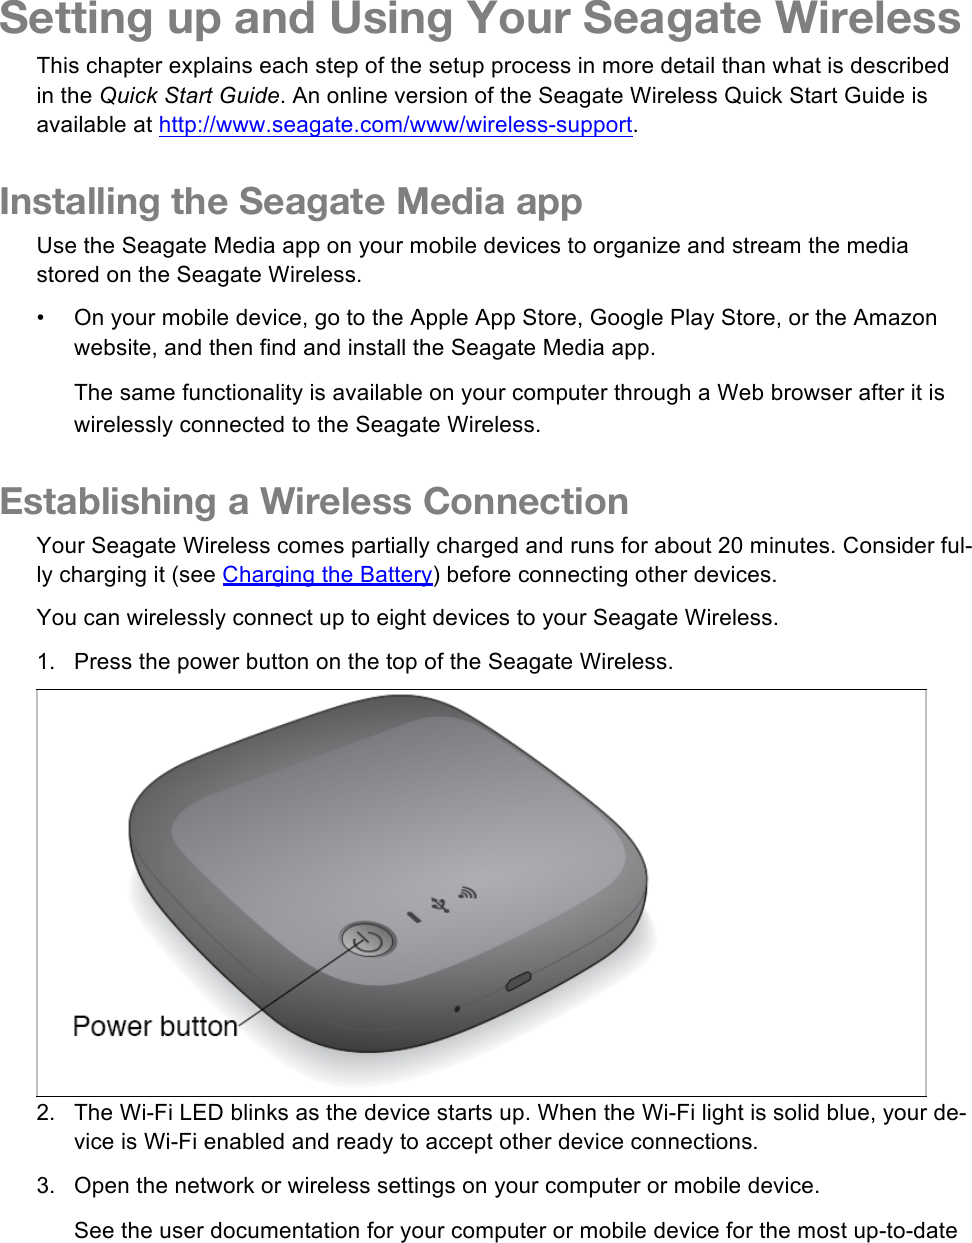 Setting up and Using Your Seagate Wireless This chapter explains each step of the setup process in more detail than what is described in the Quick Start Guide. An online version of the Seagate Wireless Quick Start Guide is available at http://www.seagate.com/www/wireless-support. Installing the Seagate Media app Use the Seagate Media app on your mobile devices to organize and stream the media stored on the Seagate Wireless.  •  On your mobile device, go to the Apple App Store, Google Play Store, or the Amazon website, and then find and install the Seagate Media app. The same functionality is available on your computer through a Web browser after it is wirelessly connected to the Seagate Wireless.  Establishing a Wireless Connection Your Seagate Wireless comes partially charged and runs for about 20 minutes. Consider ful-ly charging it (see Charging the Battery) before connecting other devices. You can wirelessly connect up to eight devices to your Seagate Wireless. 1. Press the power button on the top of the Seagate Wireless.  2. The Wi-Fi LED blinks as the device starts up. When the Wi-Fi light is solid blue, your de-vice is Wi-Fi enabled and ready to accept other device connections. 3. Open the network or wireless settings on your computer or mobile device. See the user documentation for your computer or mobile device for the most up-to-date 